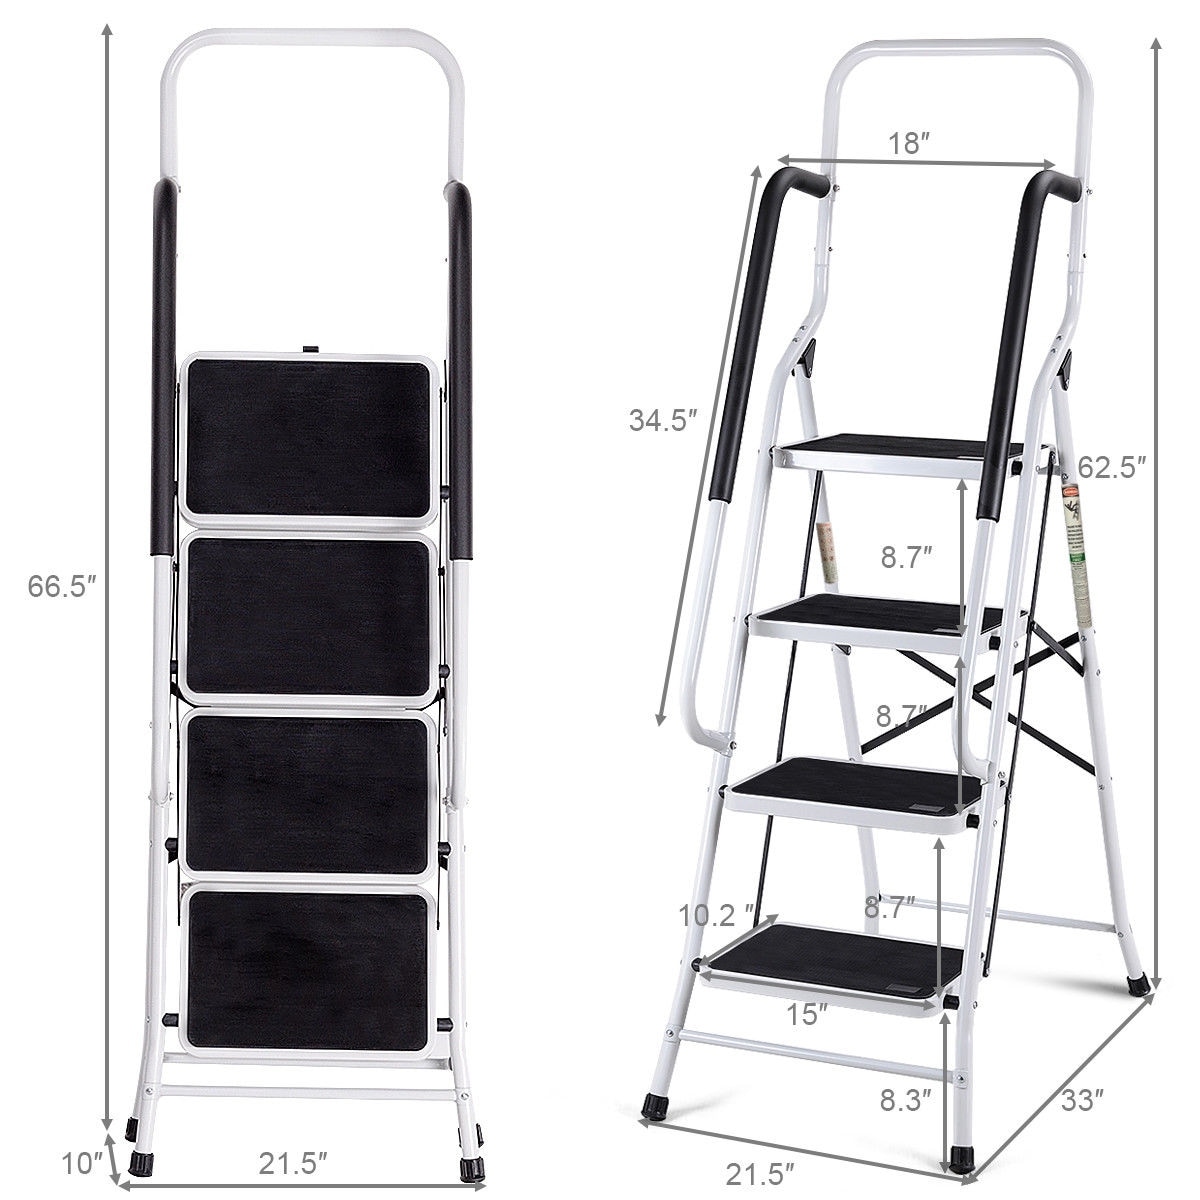 GYMAX 4 Step Ladder with Non-Slip Treads and Tool Tray 150kg Capacity Folding Aluminium Stepladder for Home Kitchen Garage Portable Heavy Duty Safety Ladders